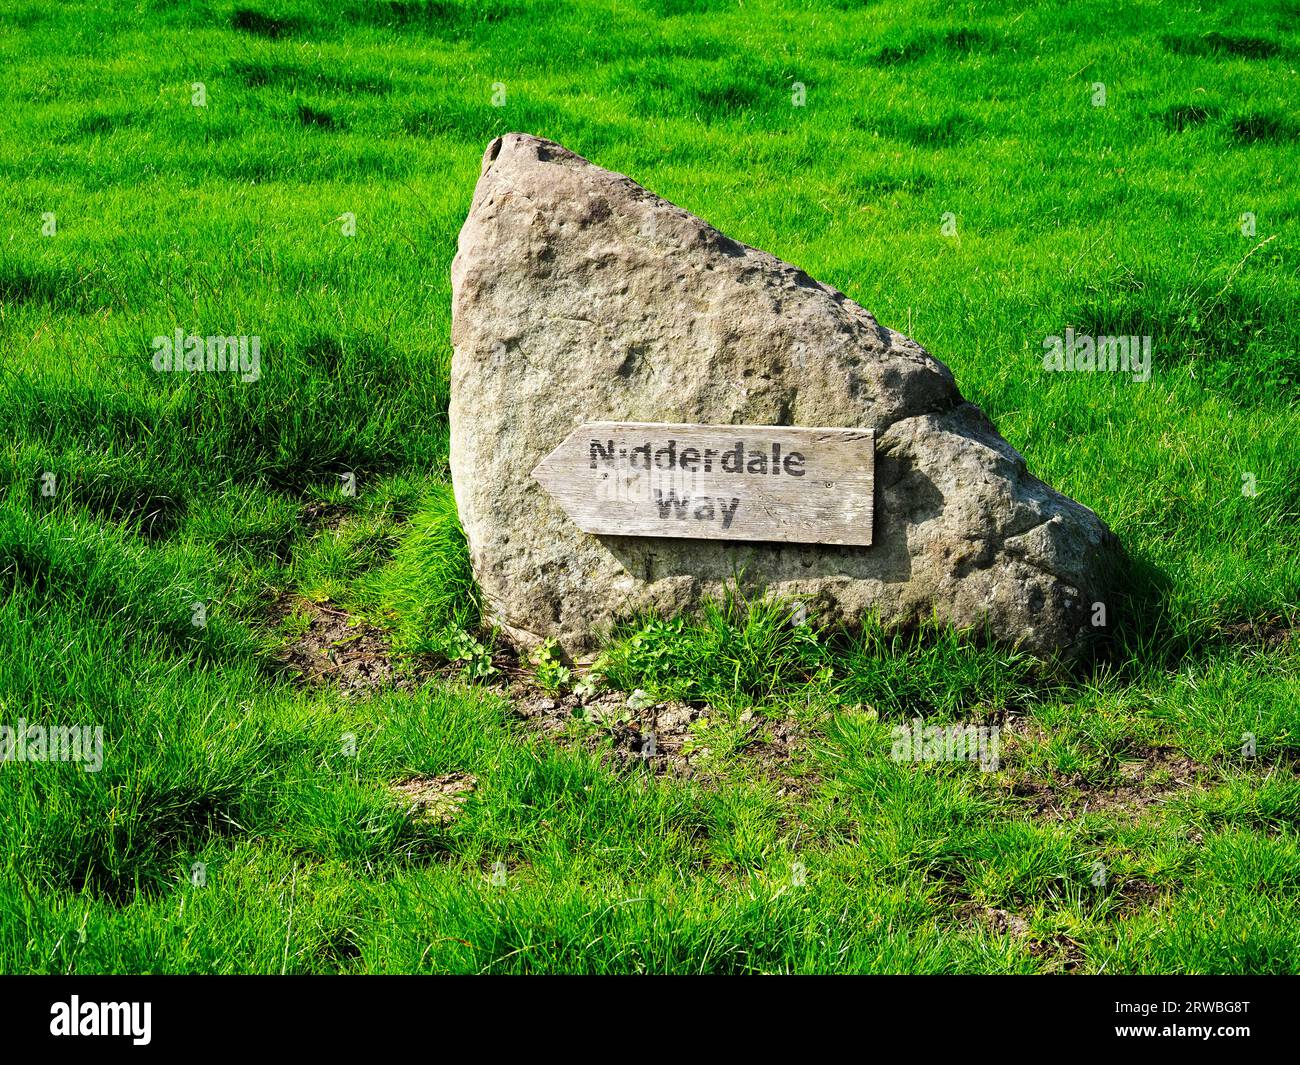 A Nidderdale Way sign on a boulder in a farmyard near Dacre Banks Nidderdale North Yorkshire England Stock Photo